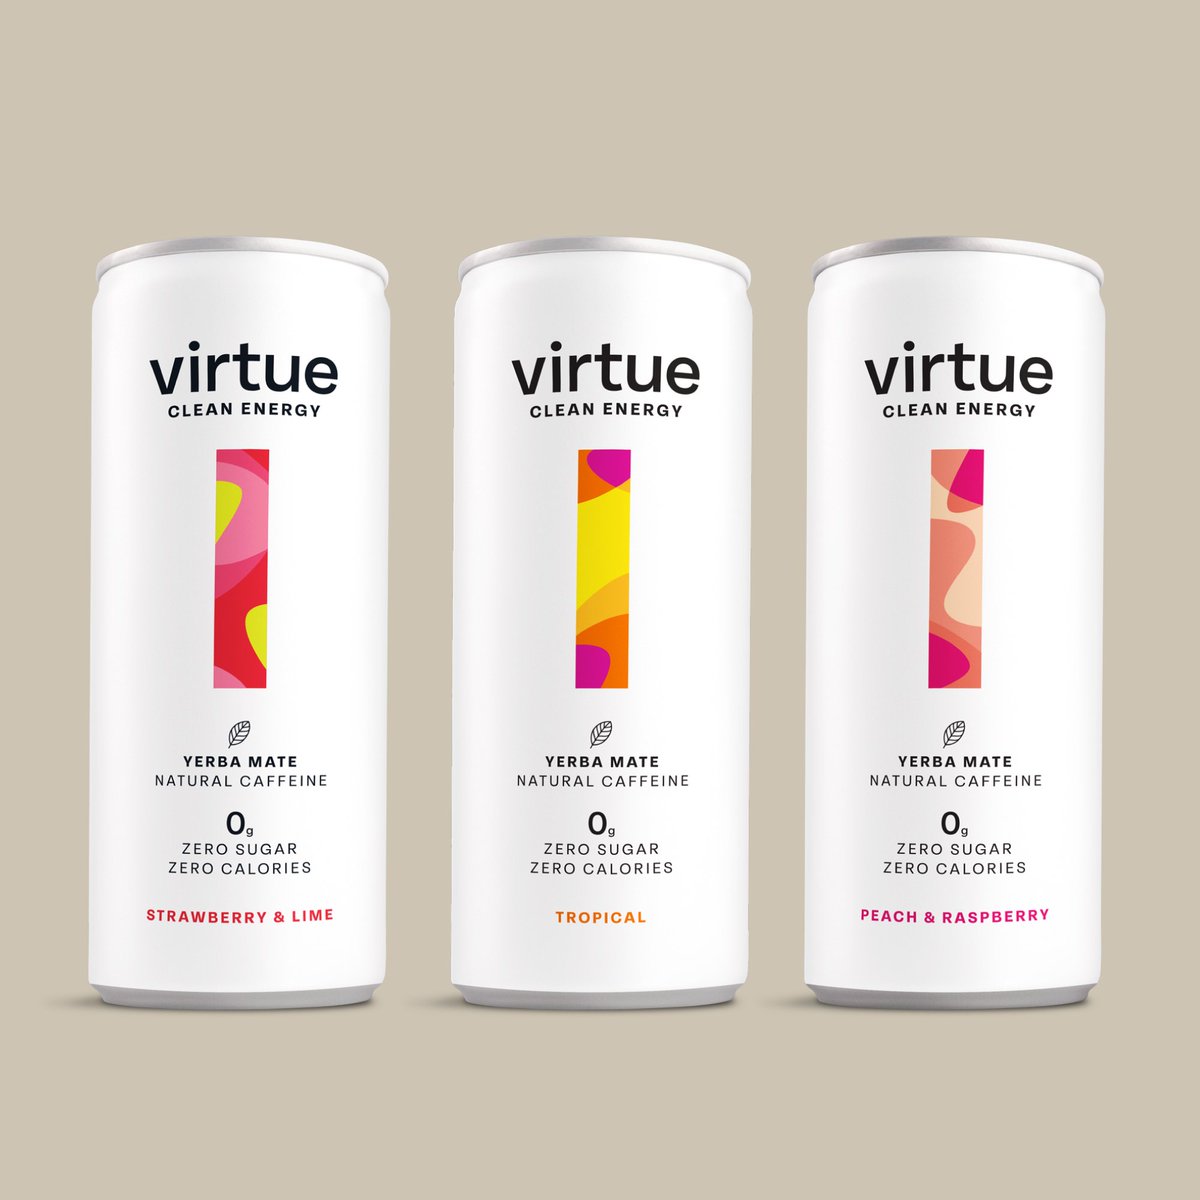 Virtue Clean Energy 🍓💜 Check out our recent blog post with Virtue - NOW! To order Virtue, visit our website: 💻 delicious-ideas.com/shop 📞 Call us on 01733 239003 delicious-ideas.com/virtue-clean-e… #virtue #virtuedrinks #tropical #strawberryandlime #peachandraspberry